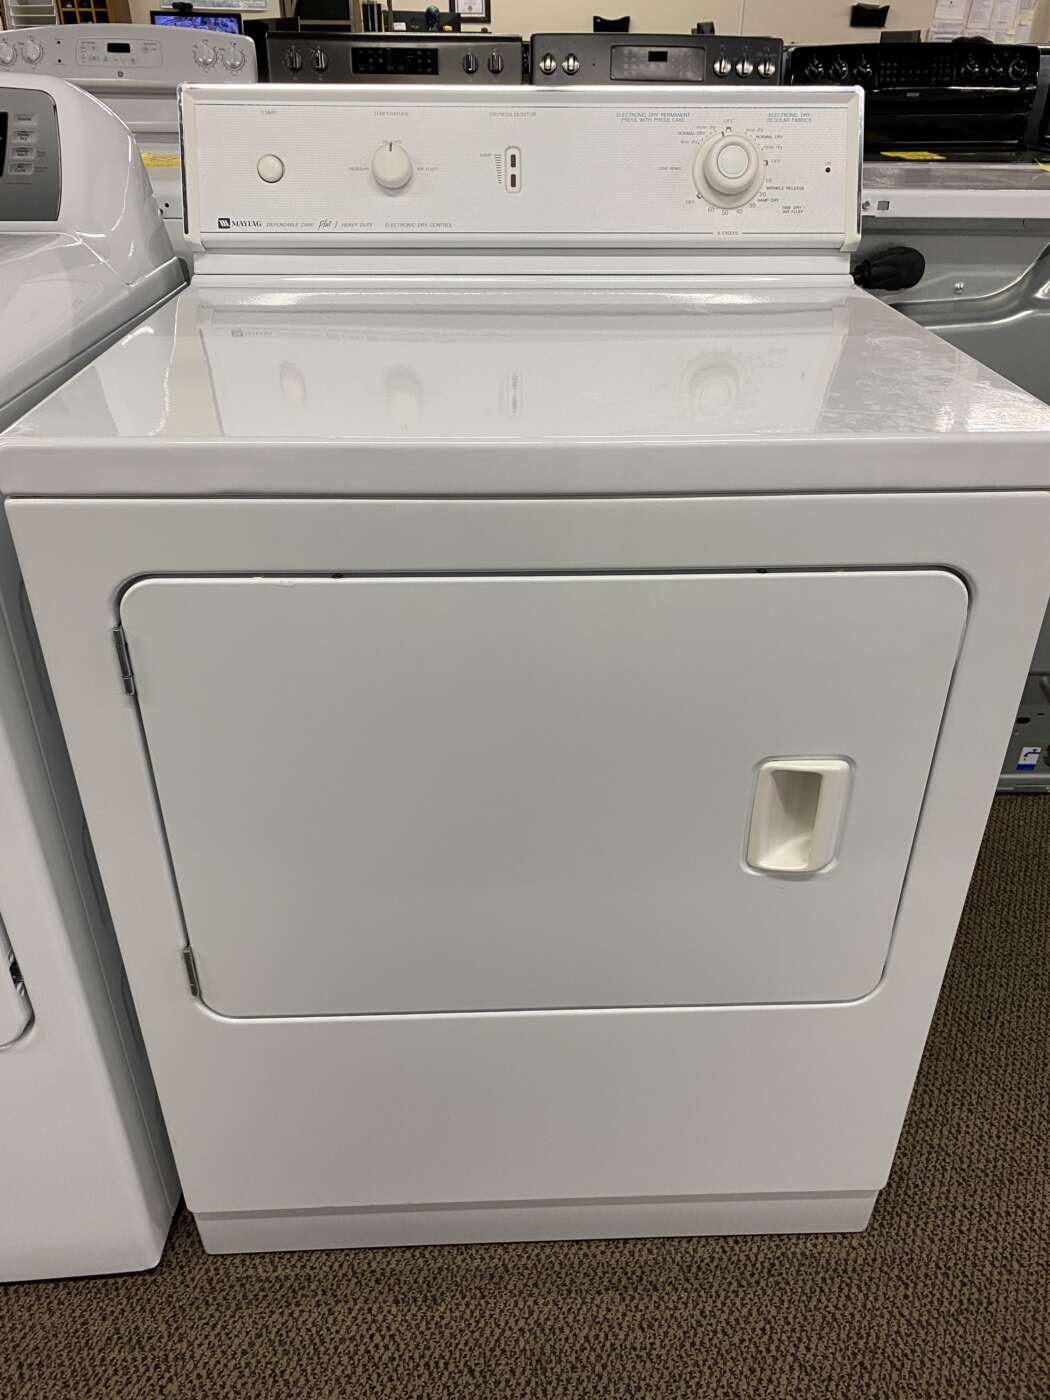 Reconditioned CLASSIC MAYTAG 7.0 Cu. Ft. Electric Dryer – White